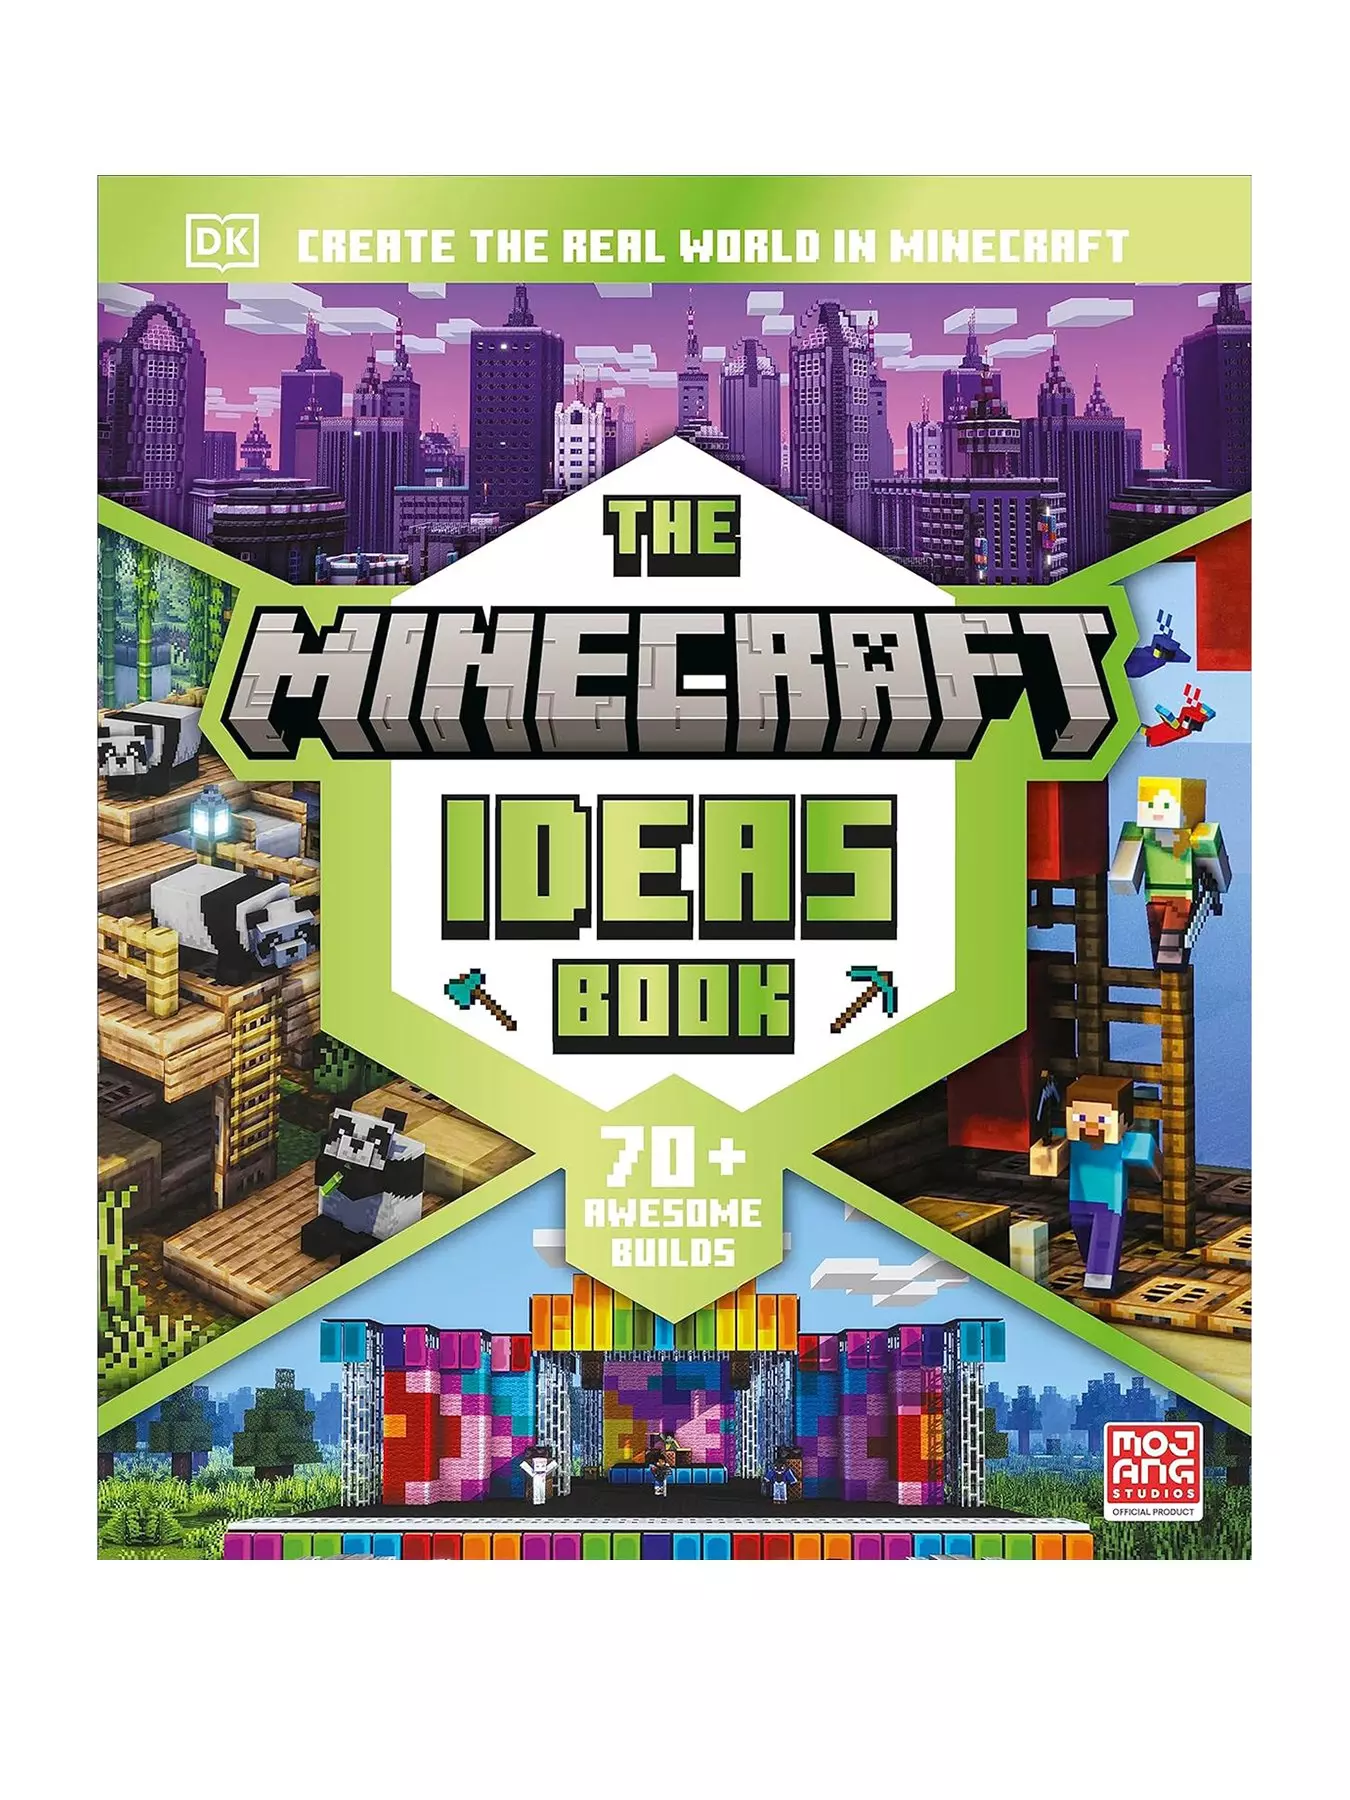 How Minecraft Legends Twists Classic Minecraft Ideas Into All-New Shapes -  Xbox Wire